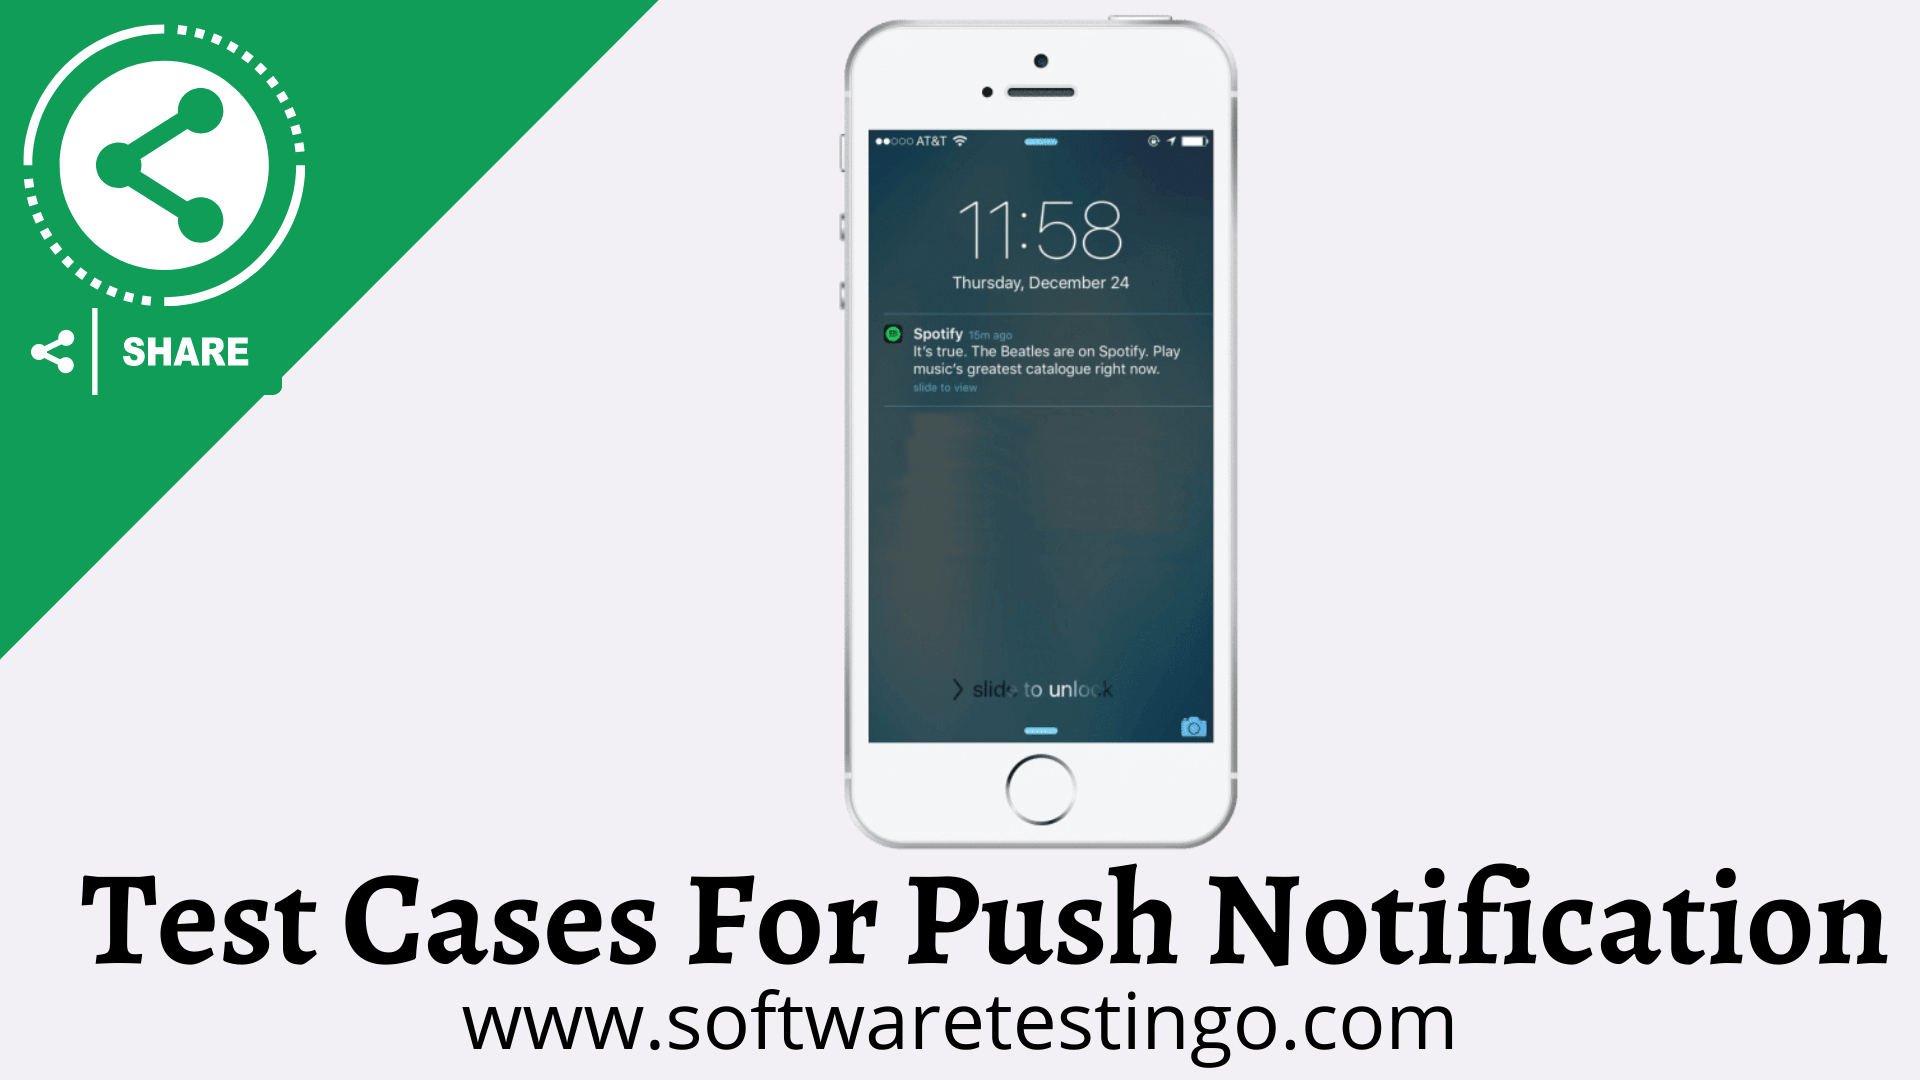 Test Cases For Push Notification